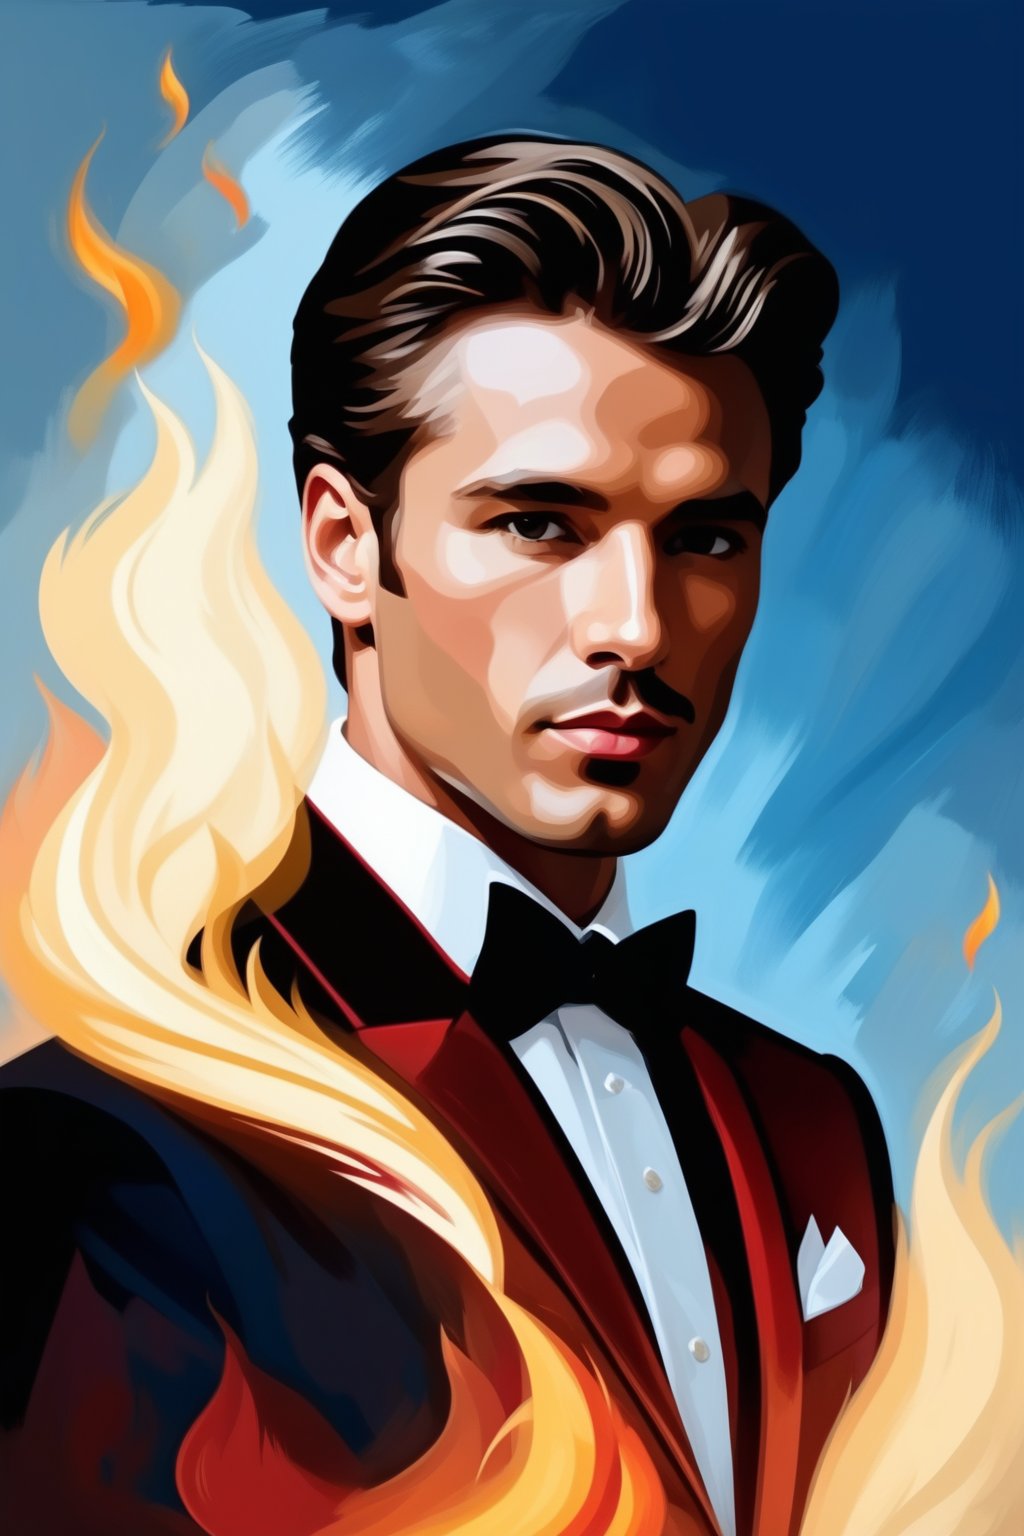 A person in a suit with a head half made of flame, vector art illustration, surrealism inspired, soft gradients, digital painting, soft lighting, minimalistic background, elegant and modern style.